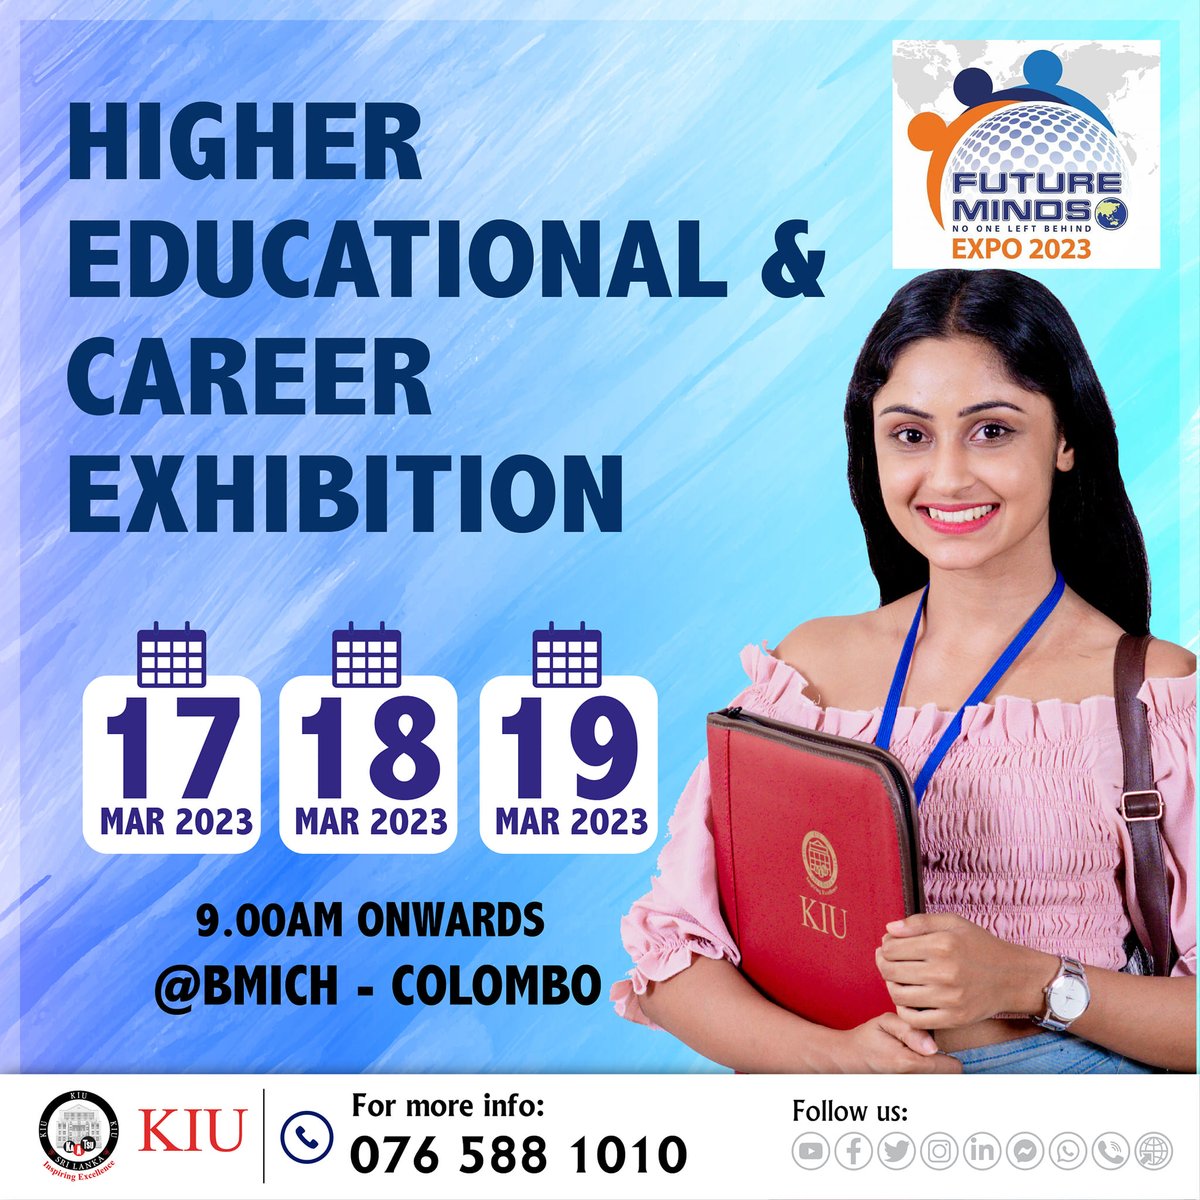 SEE YOU AT THE ⏩️
𝗙𝗨𝗧𝗨𝗥𝗘 𝗠𝗜𝗡𝗗𝗦 𝗘𝗫𝗣𝗢 𝟮𝟬𝟮𝟯
HIGHER EDUCATIONAL & CAREER EXHIBITION
Date : 17, 18 & 19 March 2023
Venue : BMICH, Colombo 
#KIU #kiusrilanka #FutureMinds #highereducation #careerguidance #BMICH #Colombo